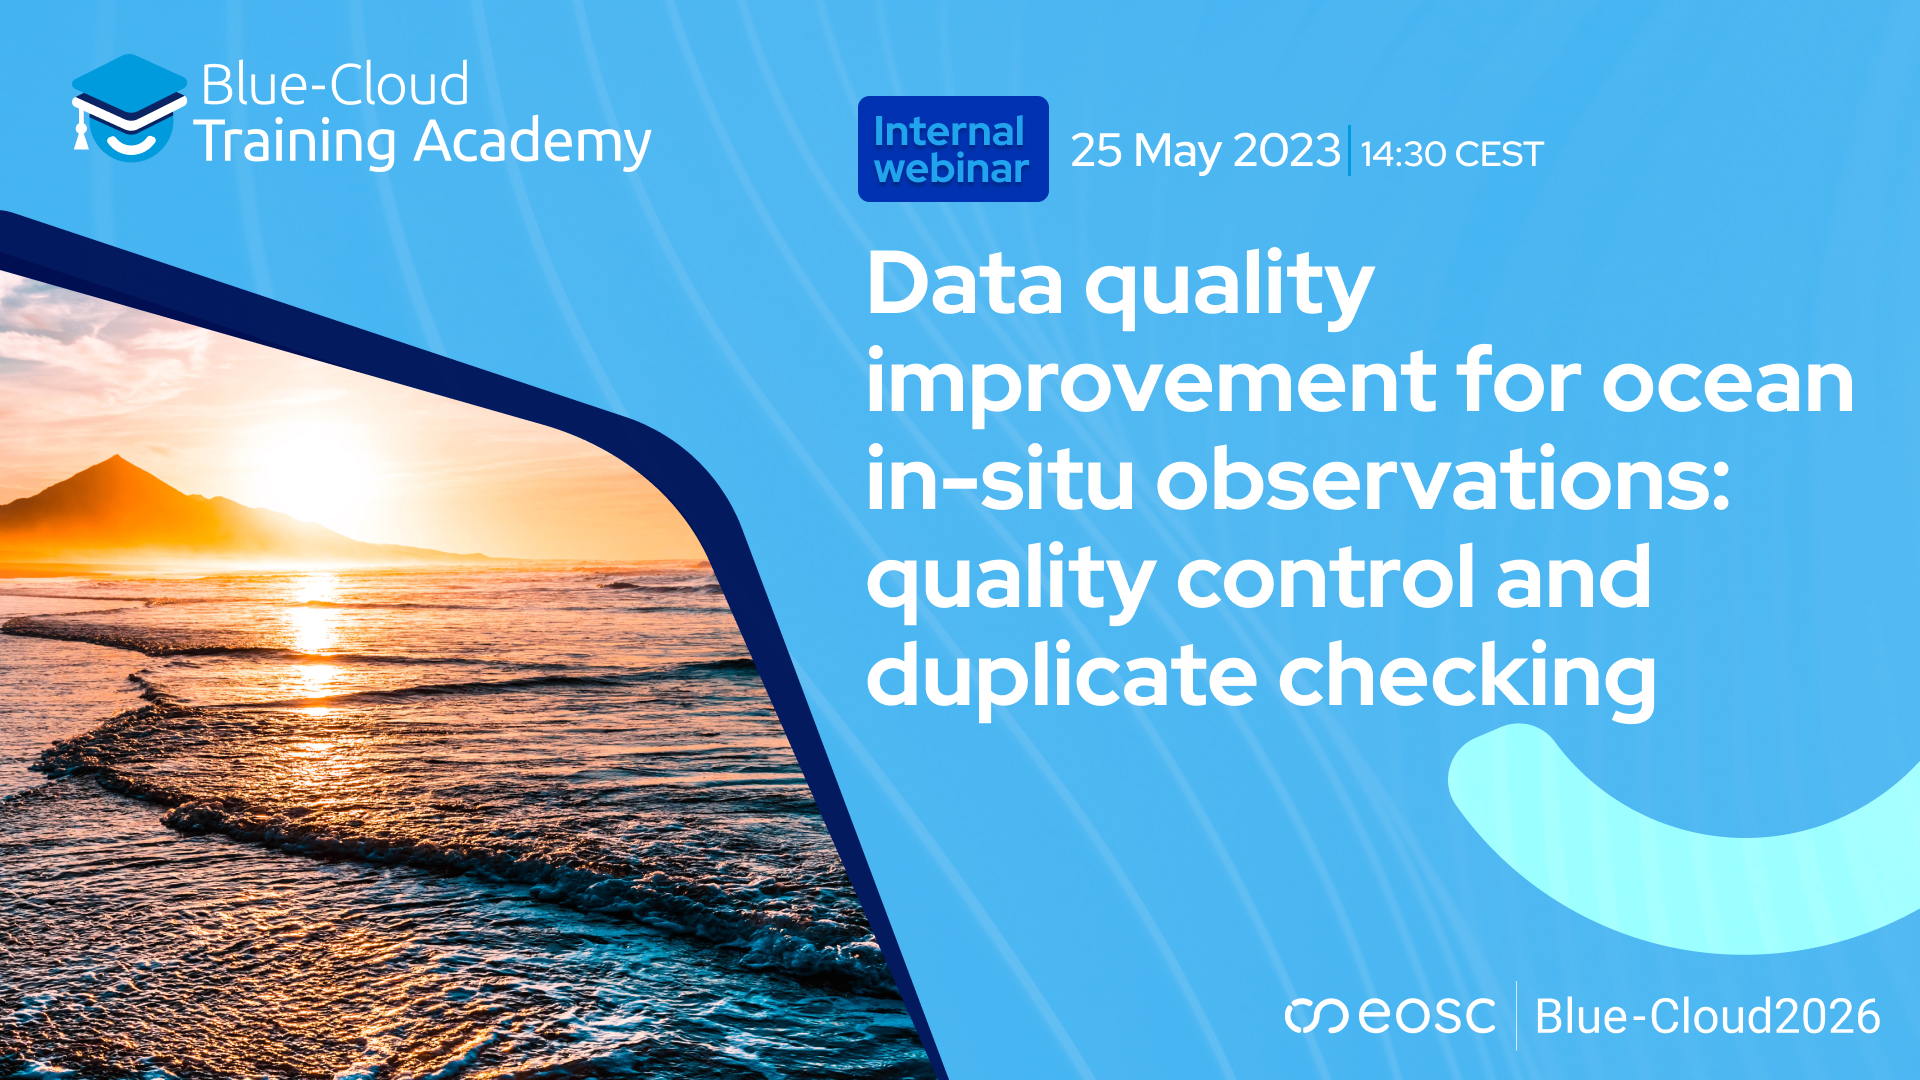 Data quality improvement for ocean in-situ observations